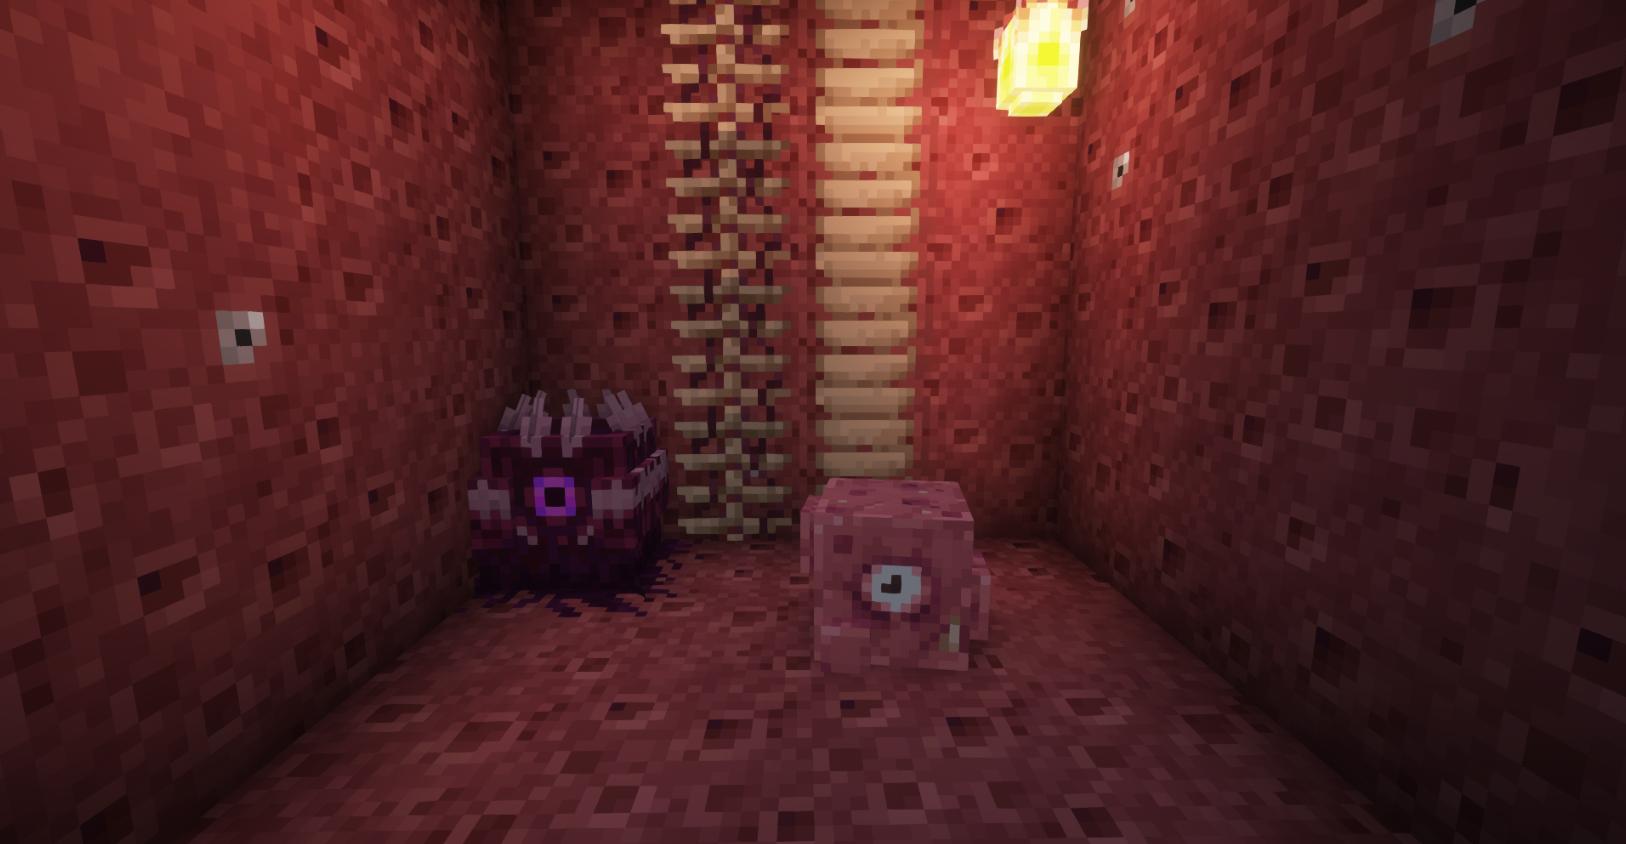 Meaty room with primordial cradle and a flesh blob.